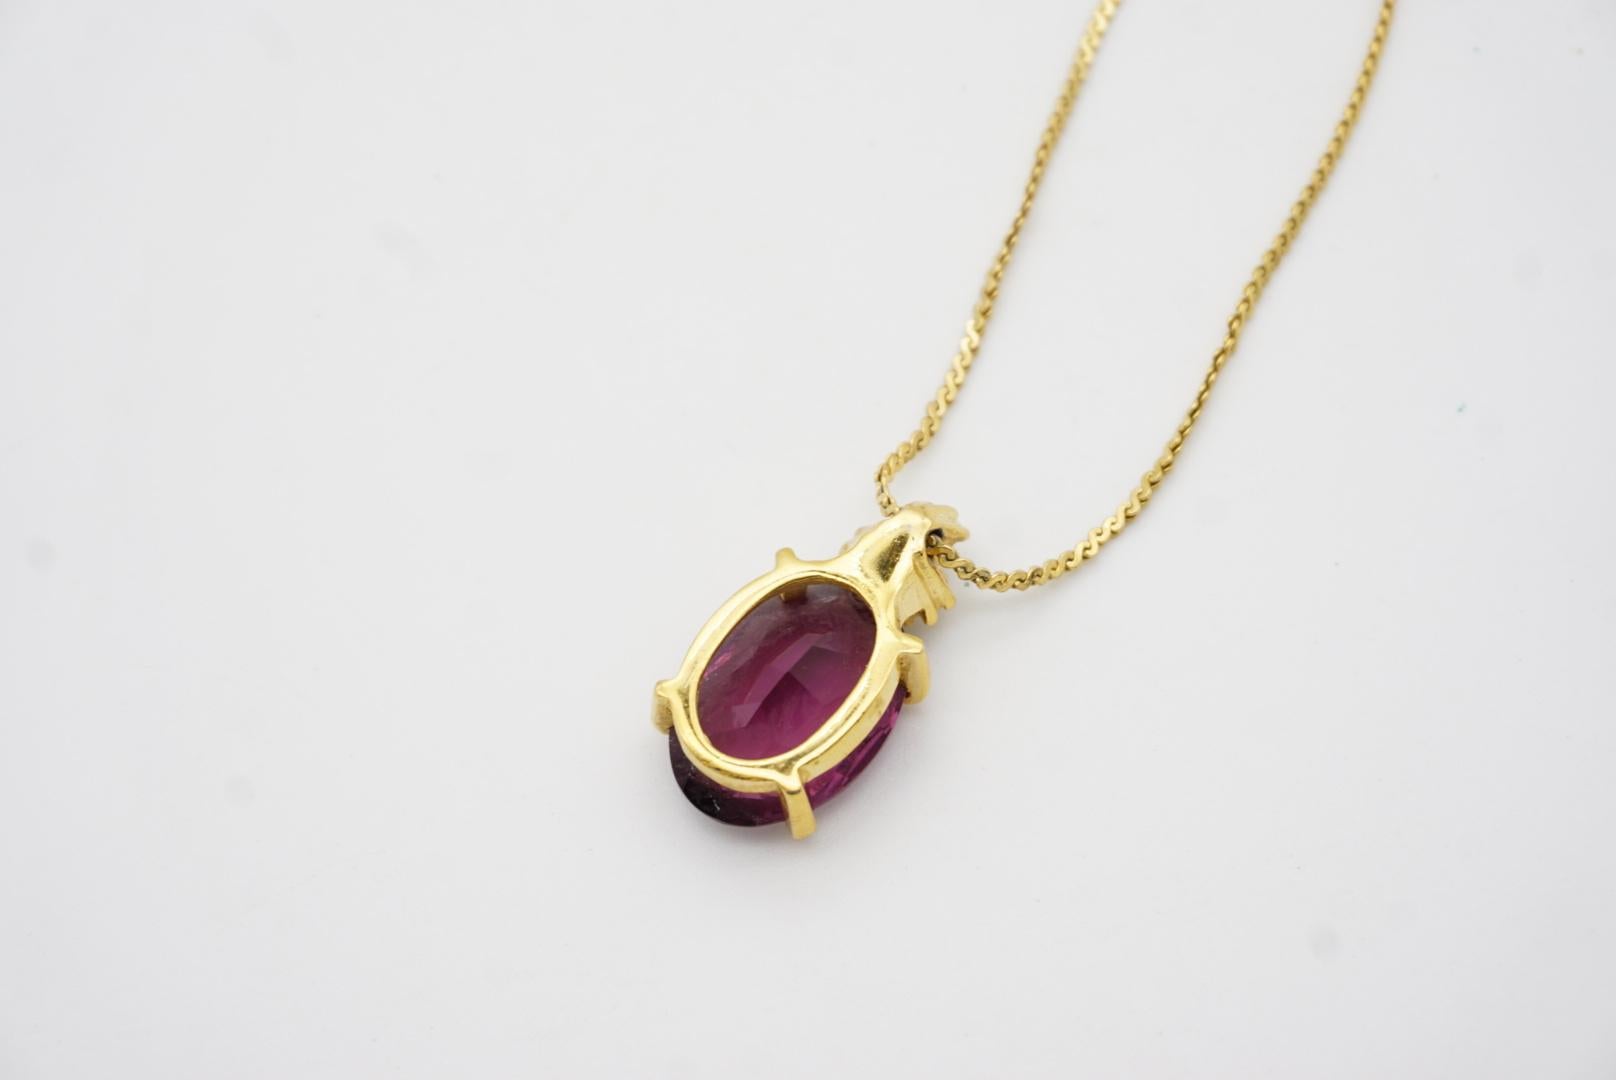 Christian Dior Vintage 1980s Amethyst Purple Oval Crystals Gold Pendant Necklace For Sale 8